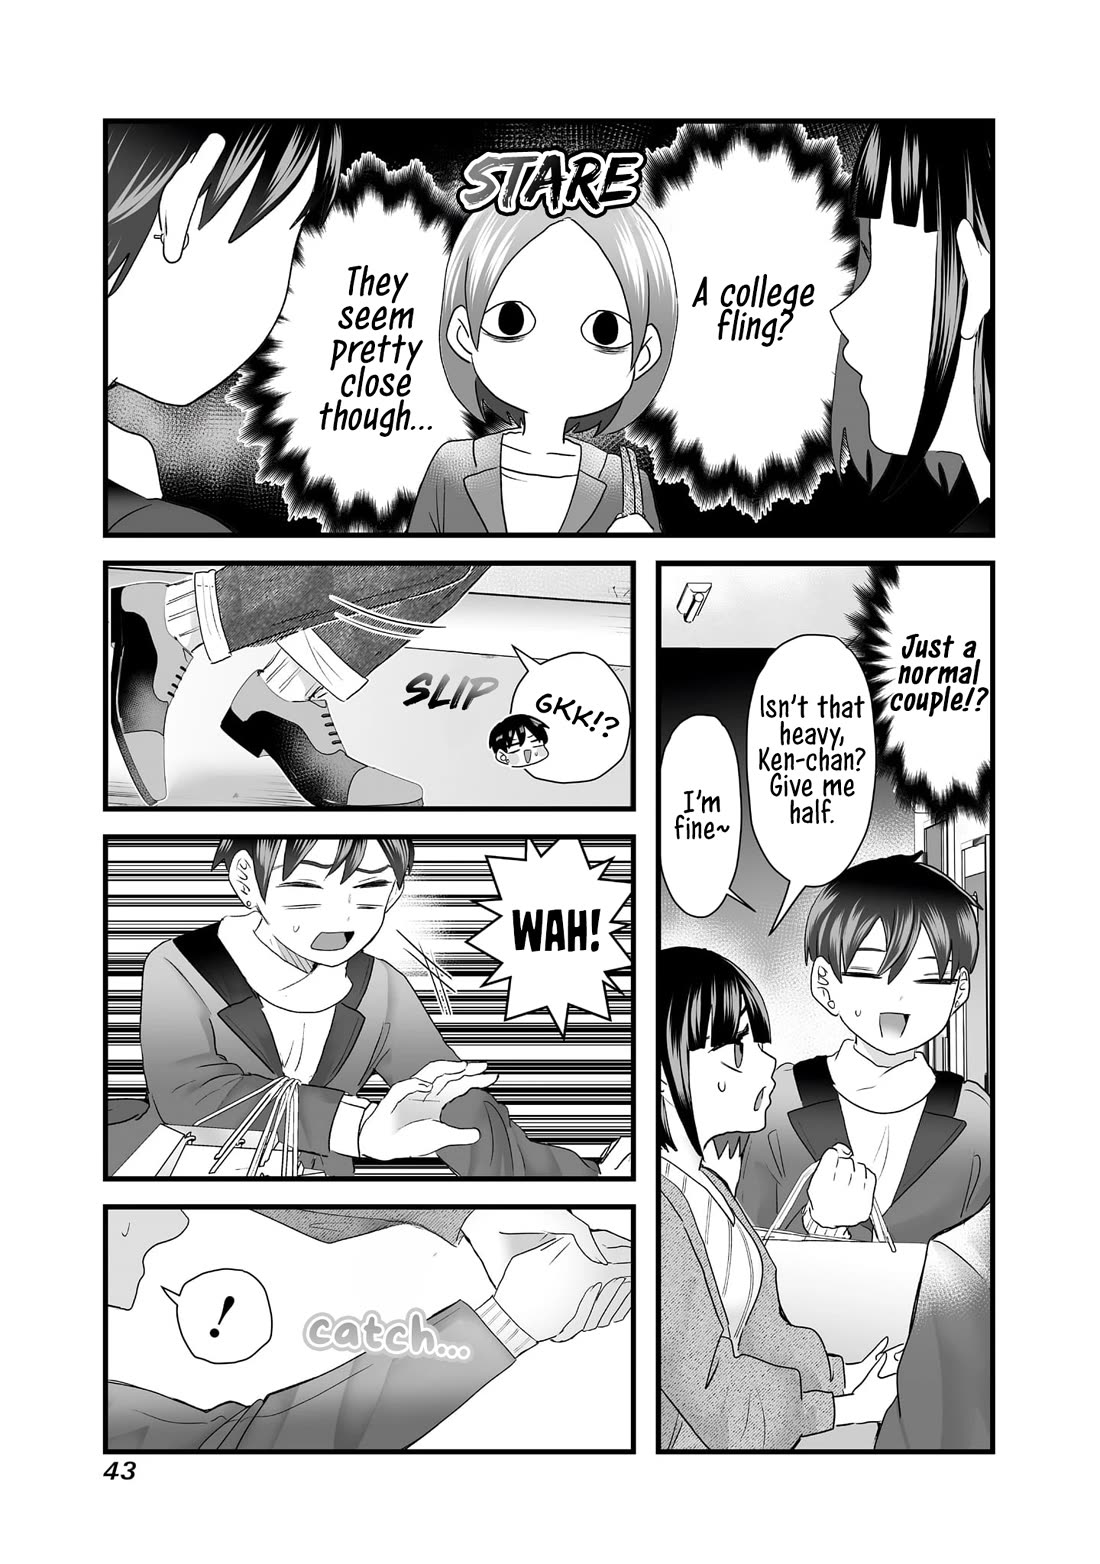 Sacchan and Ken-chan Are Going at it Again - chapter 5 - #5